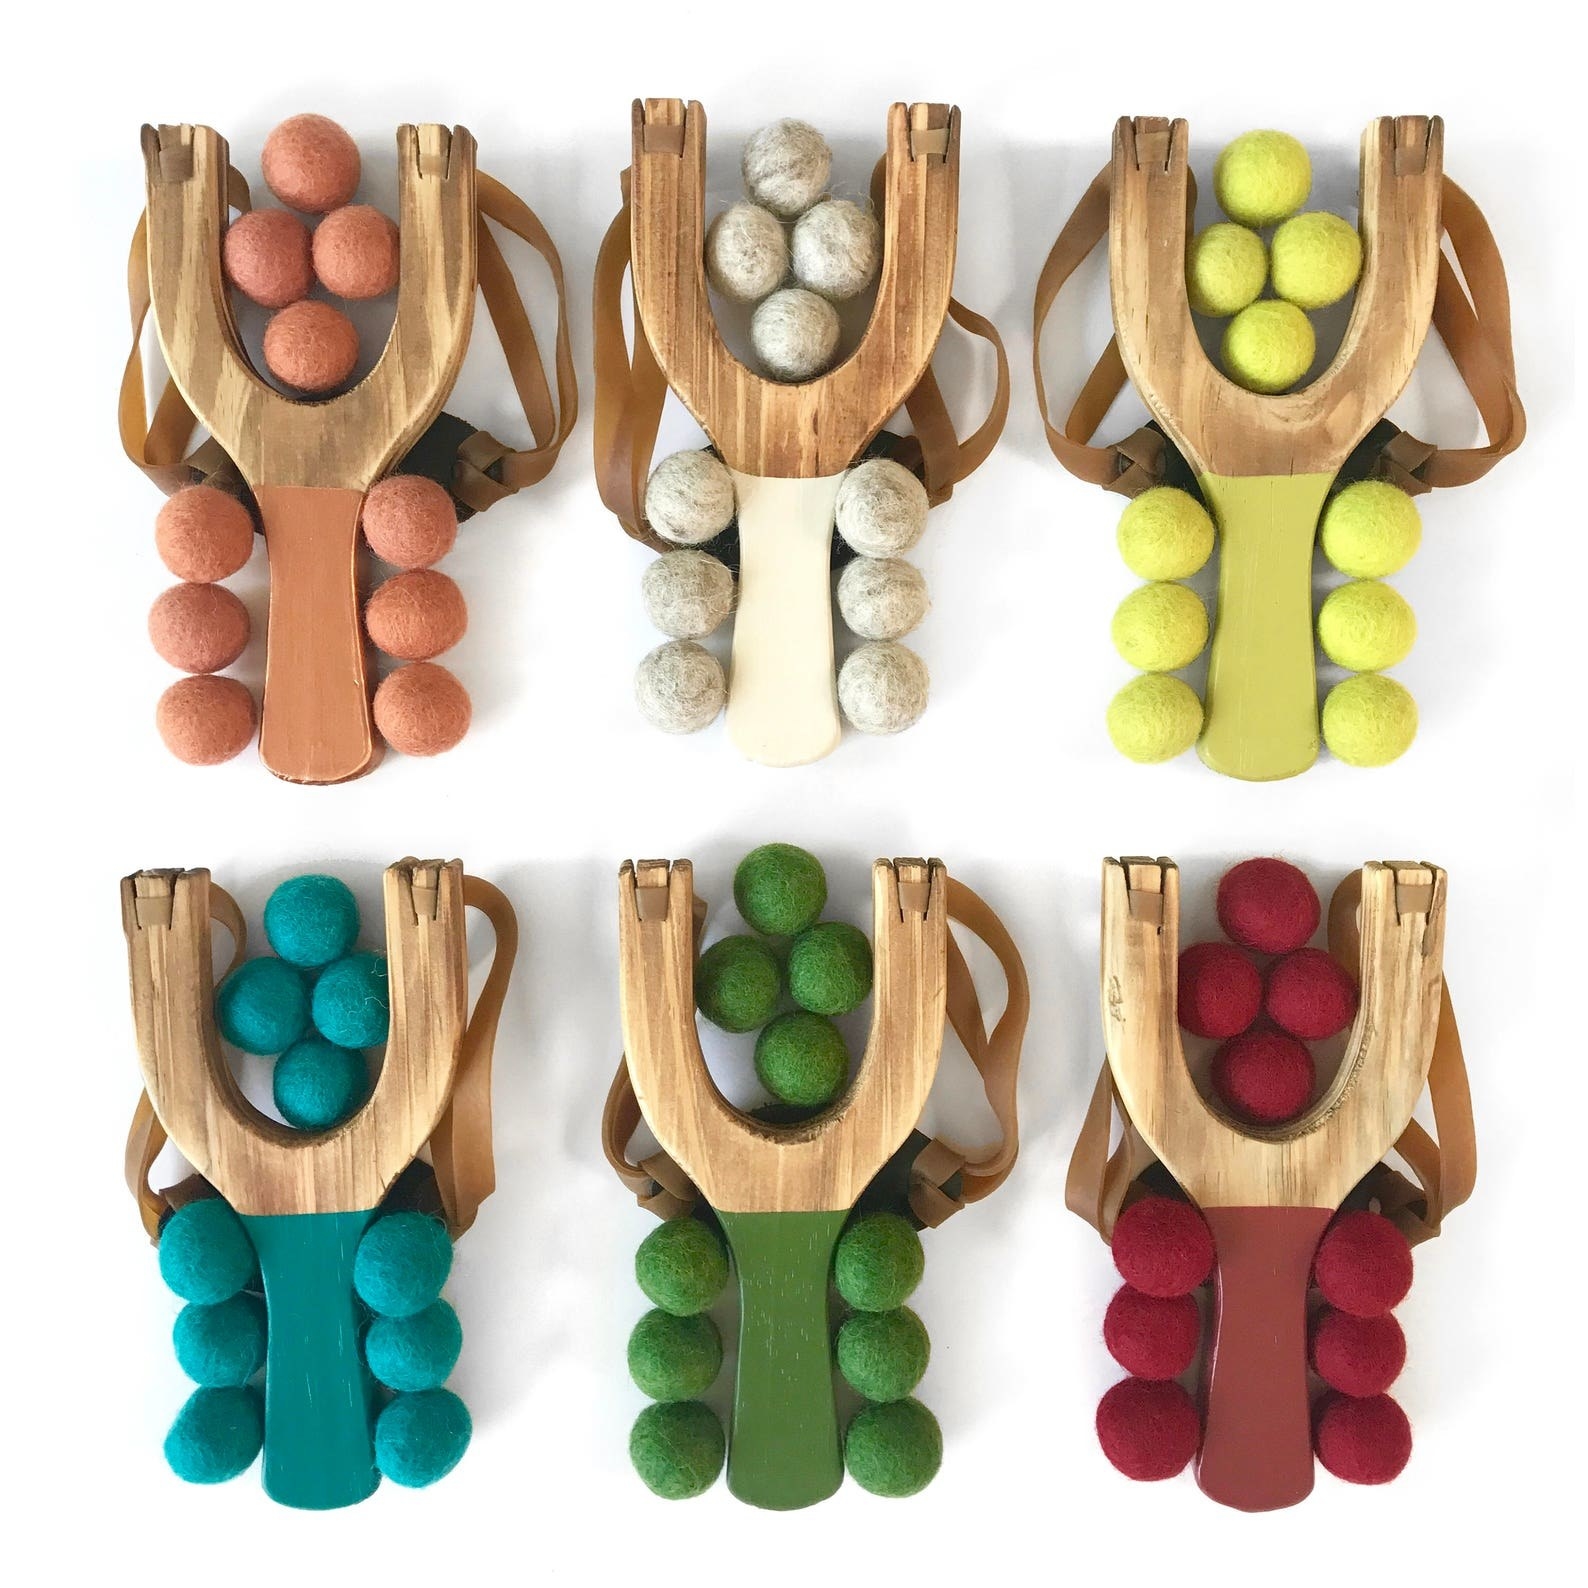 Six slingshots with multi-colored handles and pom balls